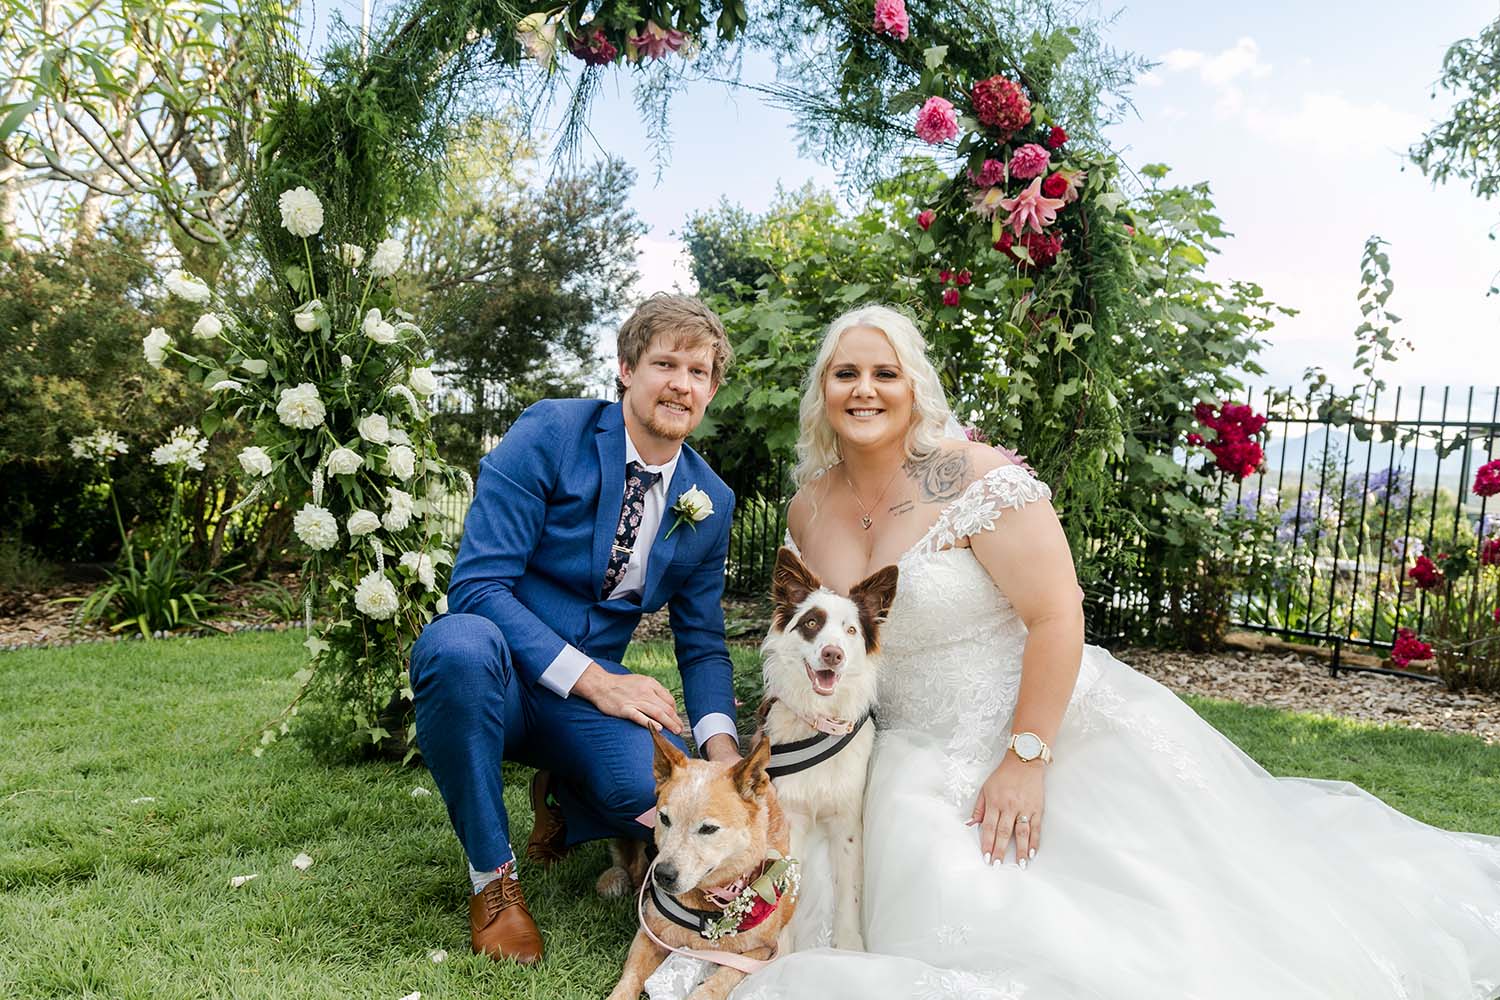 Wedding Photography - Bride and Groom with Dogs